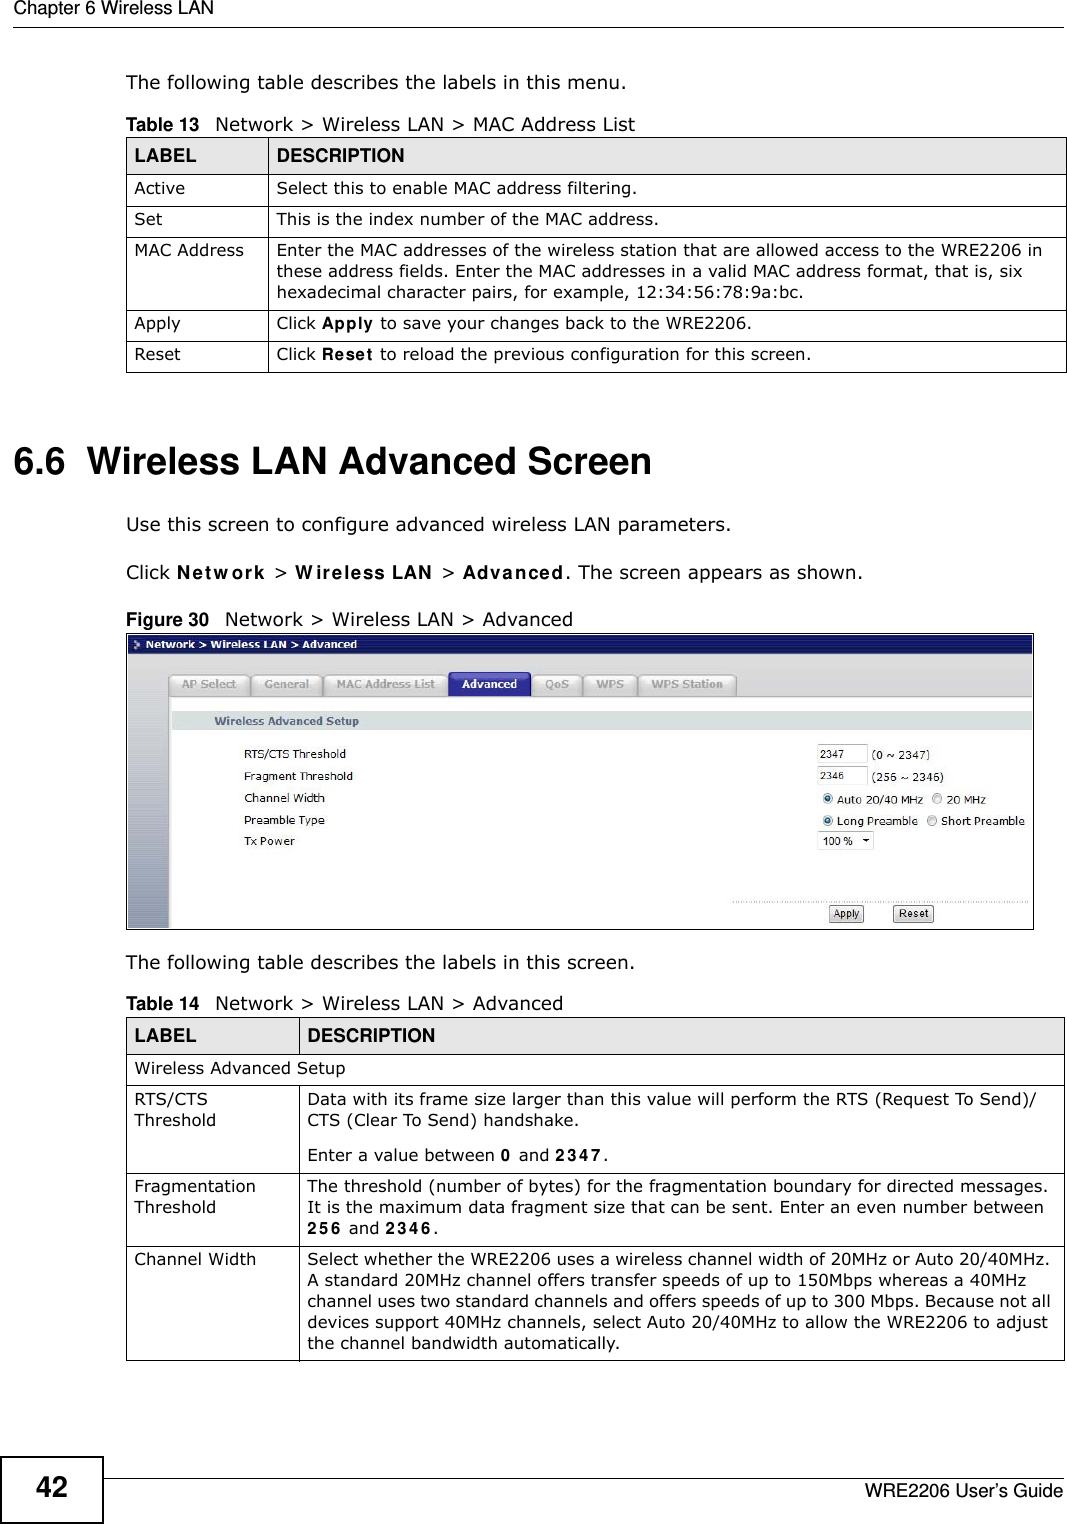 Chapter 6 Wireless LANWRE2206 User’s Guide42The following table describes the labels in this menu.6.6  Wireless LAN Advanced ScreenUse this screen to configure advanced wireless LAN parameters.Click N e t w or k &gt; W ir e le ss LAN &gt; Advanced. The screen appears as shown.Figure 30   Network &gt; Wireless LAN &gt; Advanced The following table describes the labels in this screen. Table 13   Network &gt; Wireless LAN &gt; MAC Address ListLABEL DESCRIPTIONActive Select this to enable MAC address filtering.Set This is the index number of the MAC address.MAC Address Enter the MAC addresses of the wireless station that are allowed access to the WRE2206 in these address fields. Enter the MAC addresses in a valid MAC address format, that is, six hexadecimal character pairs, for example, 12:34:56:78:9a:bc.Apply Click Apply to save your changes back to the WRE2206.Reset Click Reset  to reload the previous configuration for this screen.Table 14   Network &gt; Wireless LAN &gt; AdvancedLABEL DESCRIPTIONWireless Advanced SetupRTS/CTS ThresholdData with its frame size larger than this value will perform the RTS (Request To Send)/CTS (Clear To Send) handshake. Enter a value between 0 and 2 3 4 7 . Fragmentation ThresholdThe threshold (number of bytes) for the fragmentation boundary for directed messages. It is the maximum data fragment size that can be sent. Enter an even number between 2 5 6  and 2 3 4 6 .Channel Width Select whether the WRE2206 uses a wireless channel width of 20MHz or Auto 20/40MHz. A standard 20MHz channel offers transfer speeds of up to 150Mbps whereas a 40MHz channel uses two standard channels and offers speeds of up to 300 Mbps. Because not all devices support 40MHz channels, select Auto 20/40MHz to allow the WRE2206 to adjust the channel bandwidth automatically.